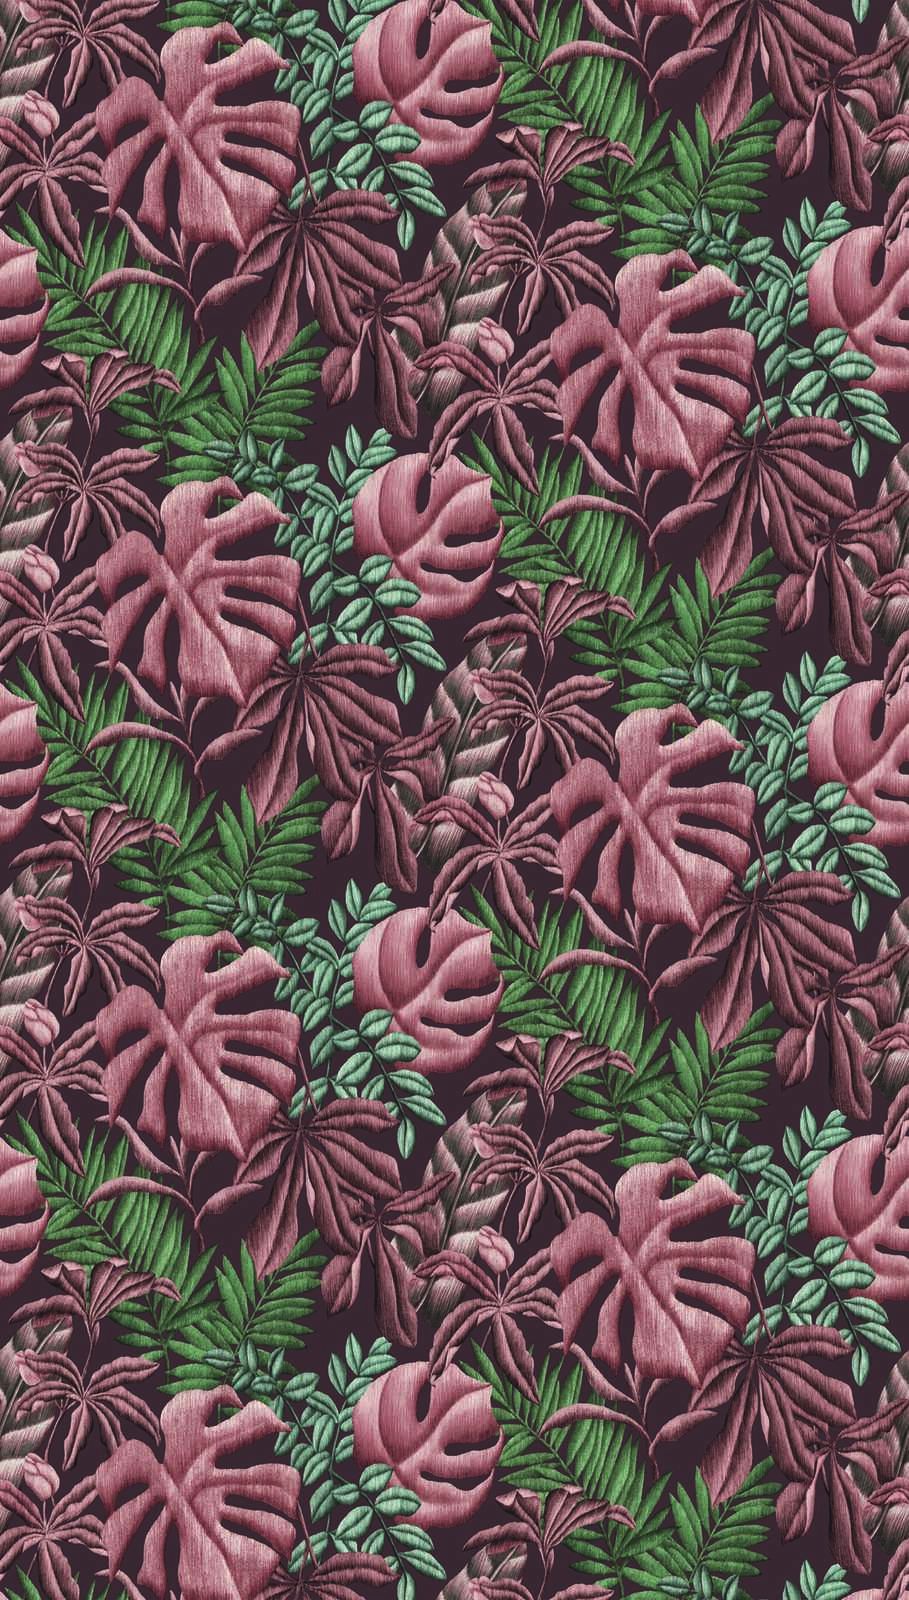             Floral non-woven wallpaper with leaves fern & banana leaves - pink, green, turquoise
        